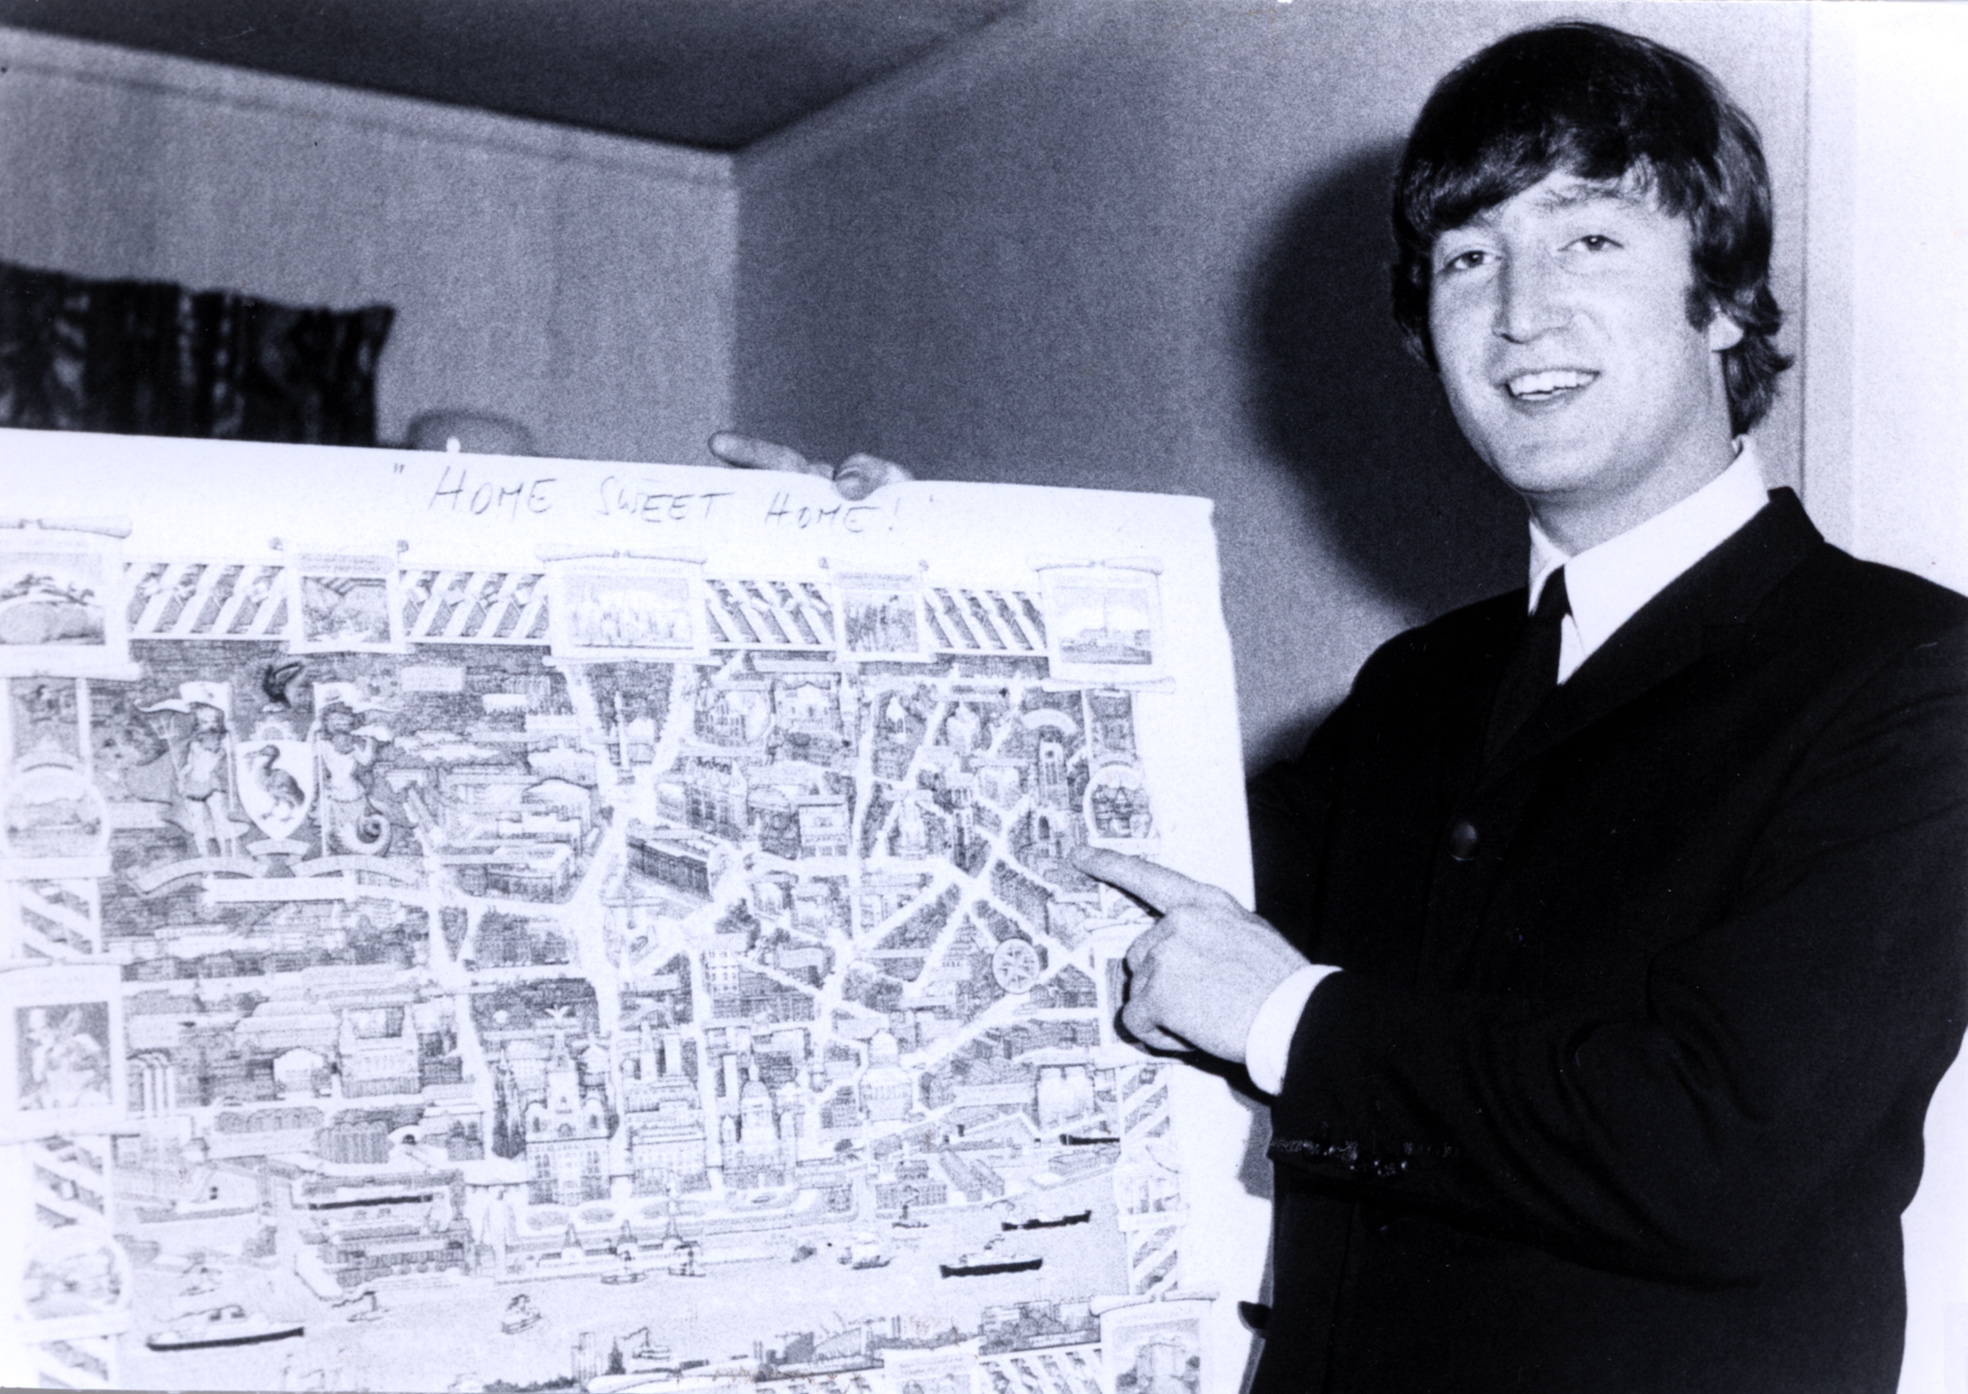 John Lennon of The Beatles points to a map of Liverpool